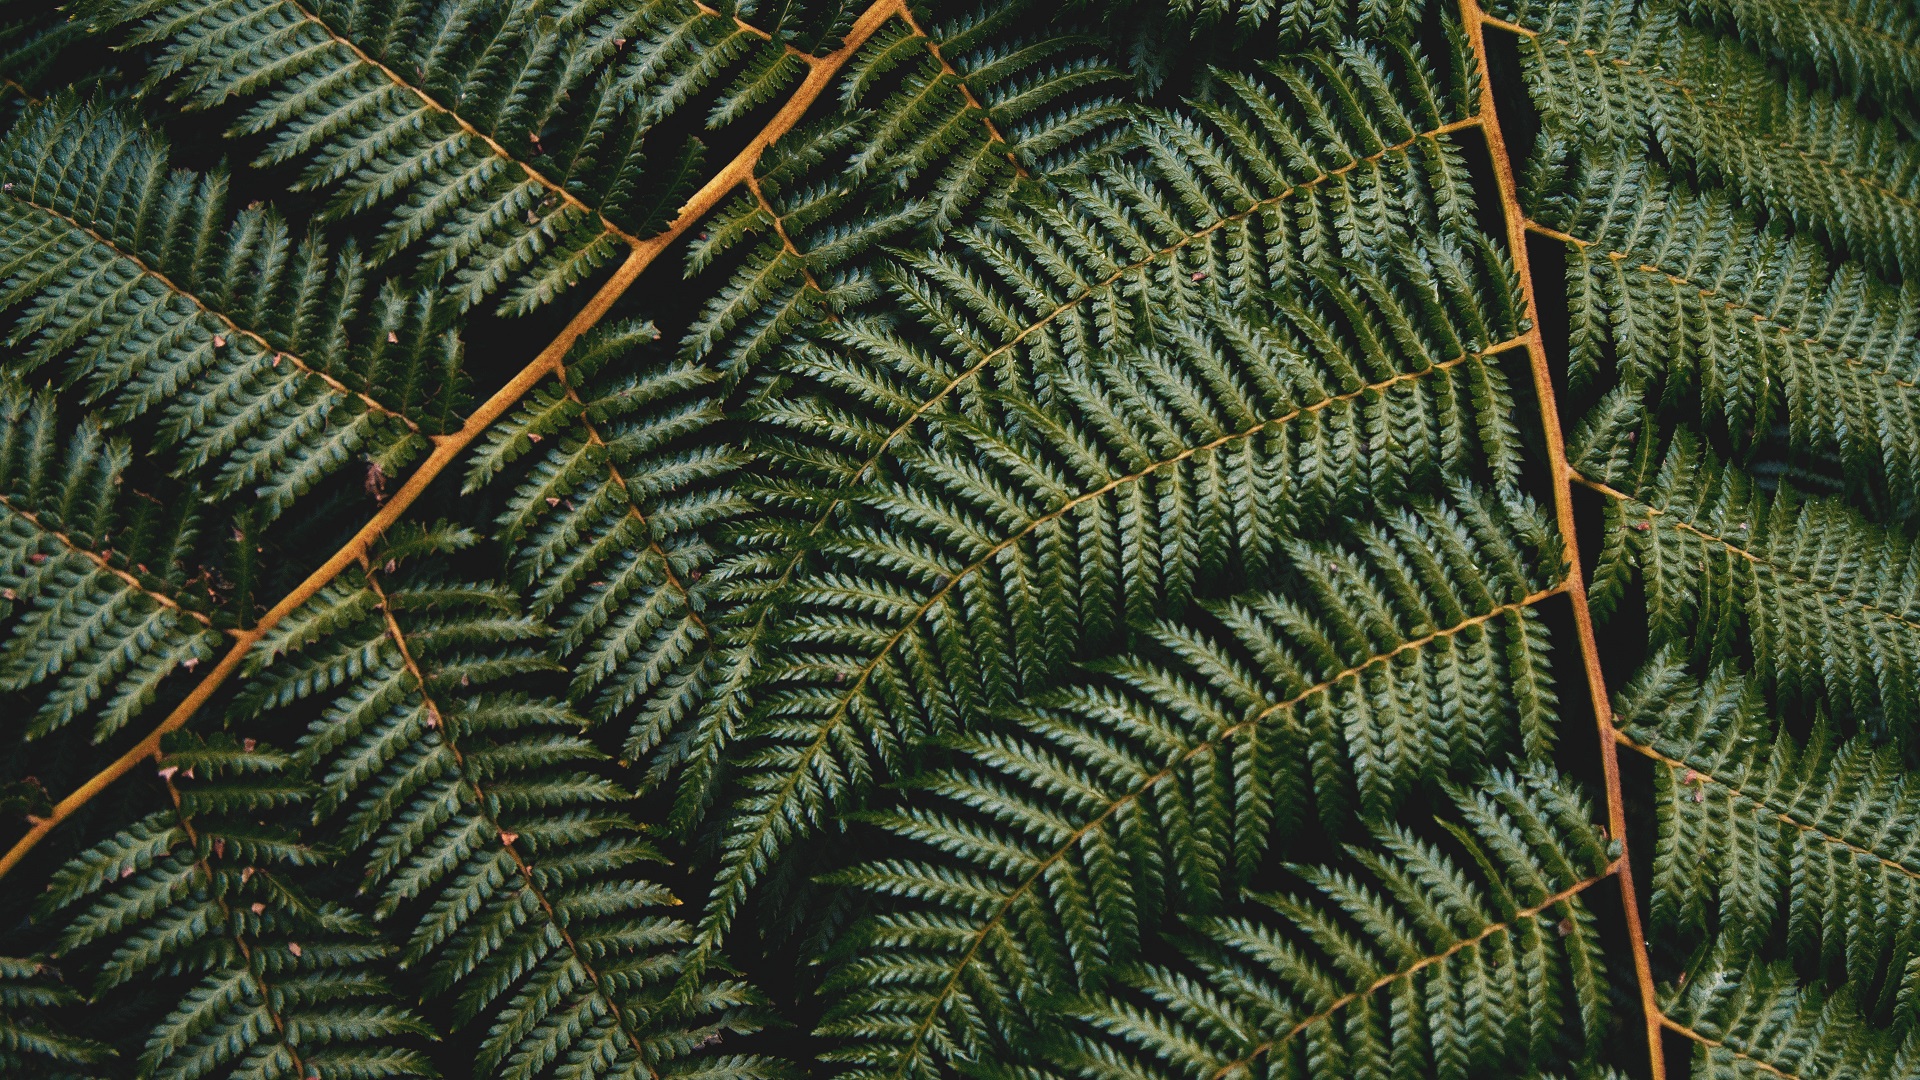 General 1920x1080 nature leaves plants